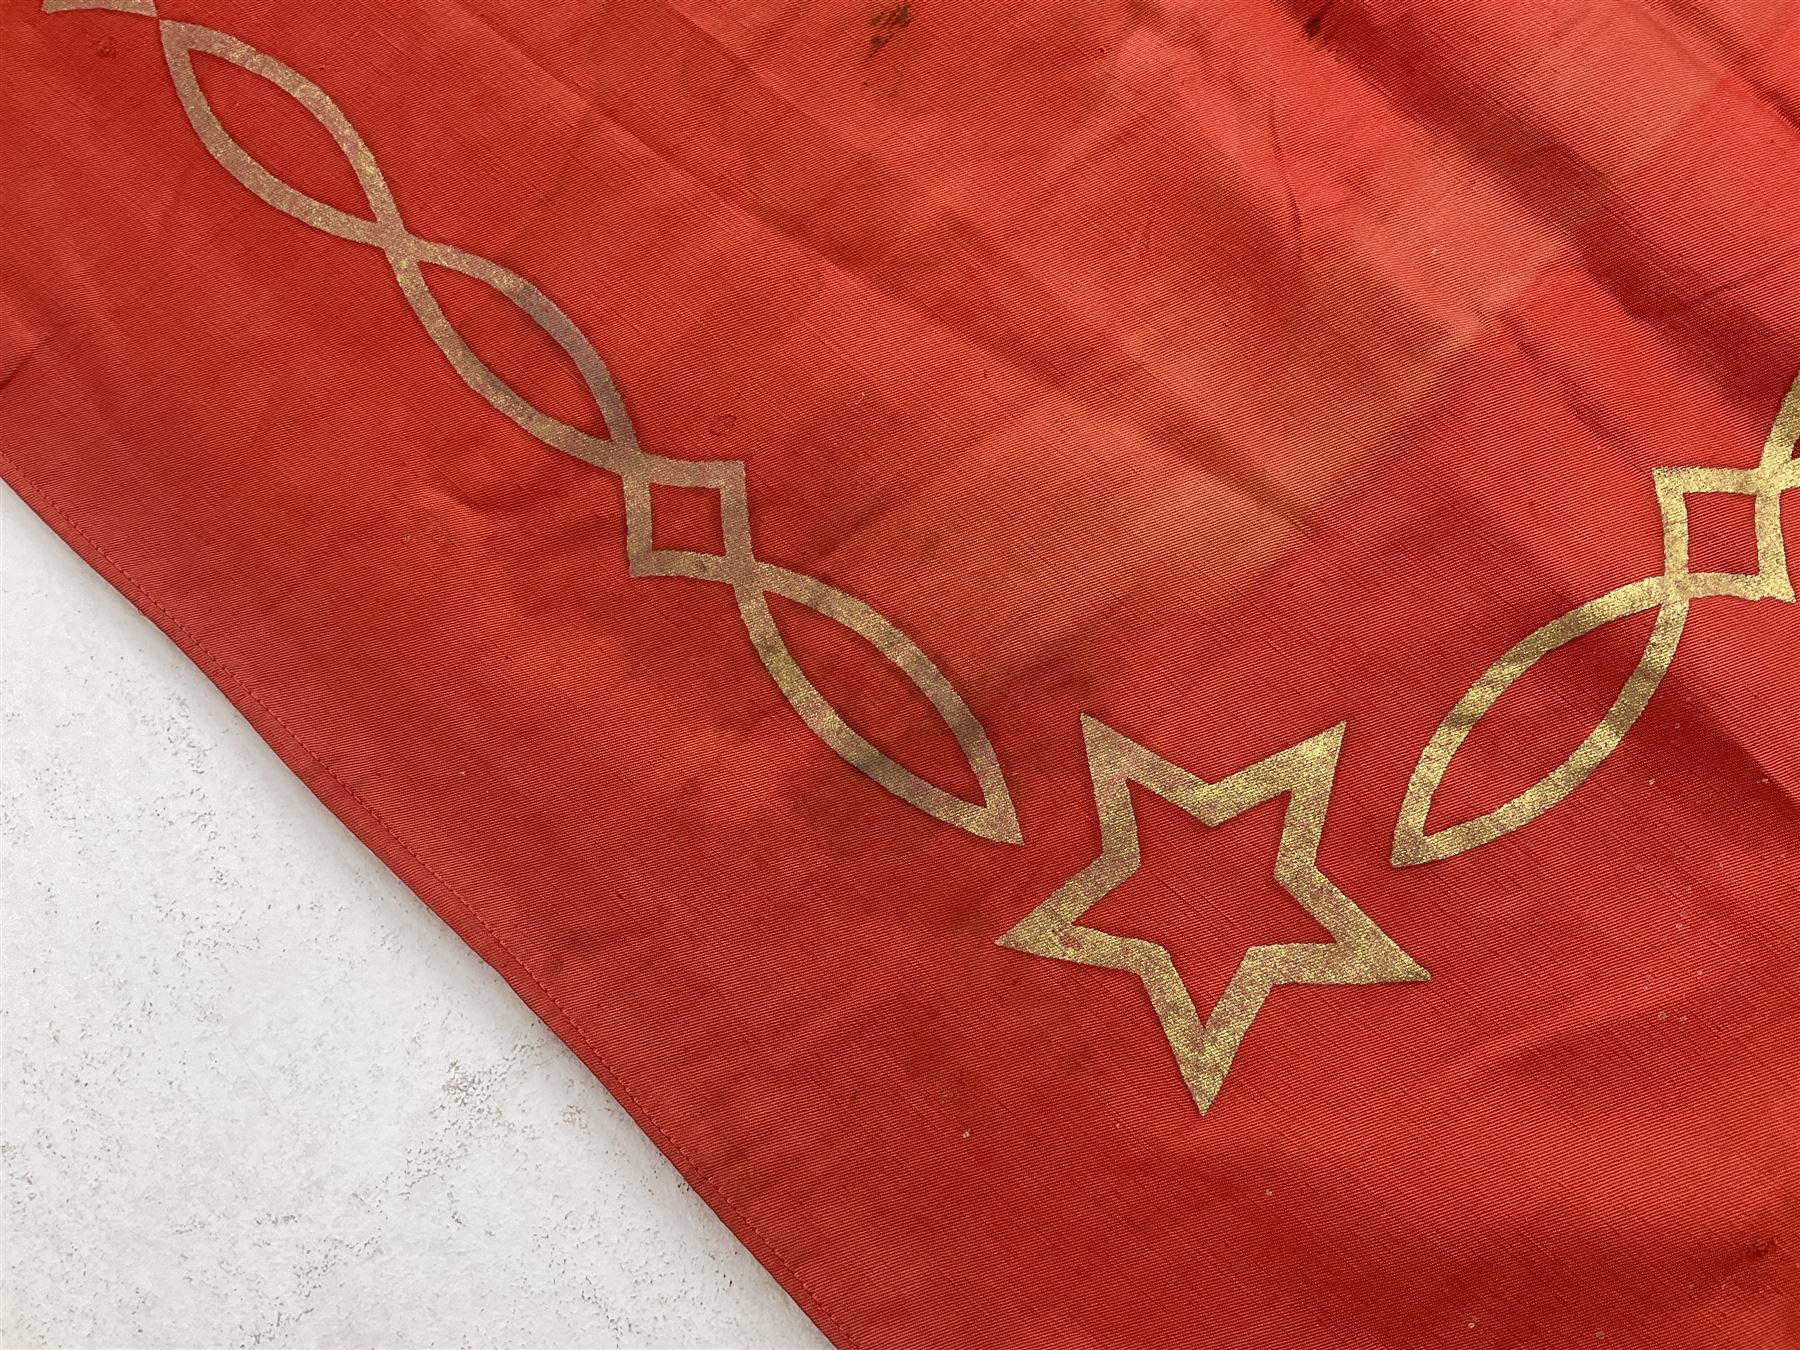 1970s Soviet banner printed in gold on a red ground - Image 7 of 38